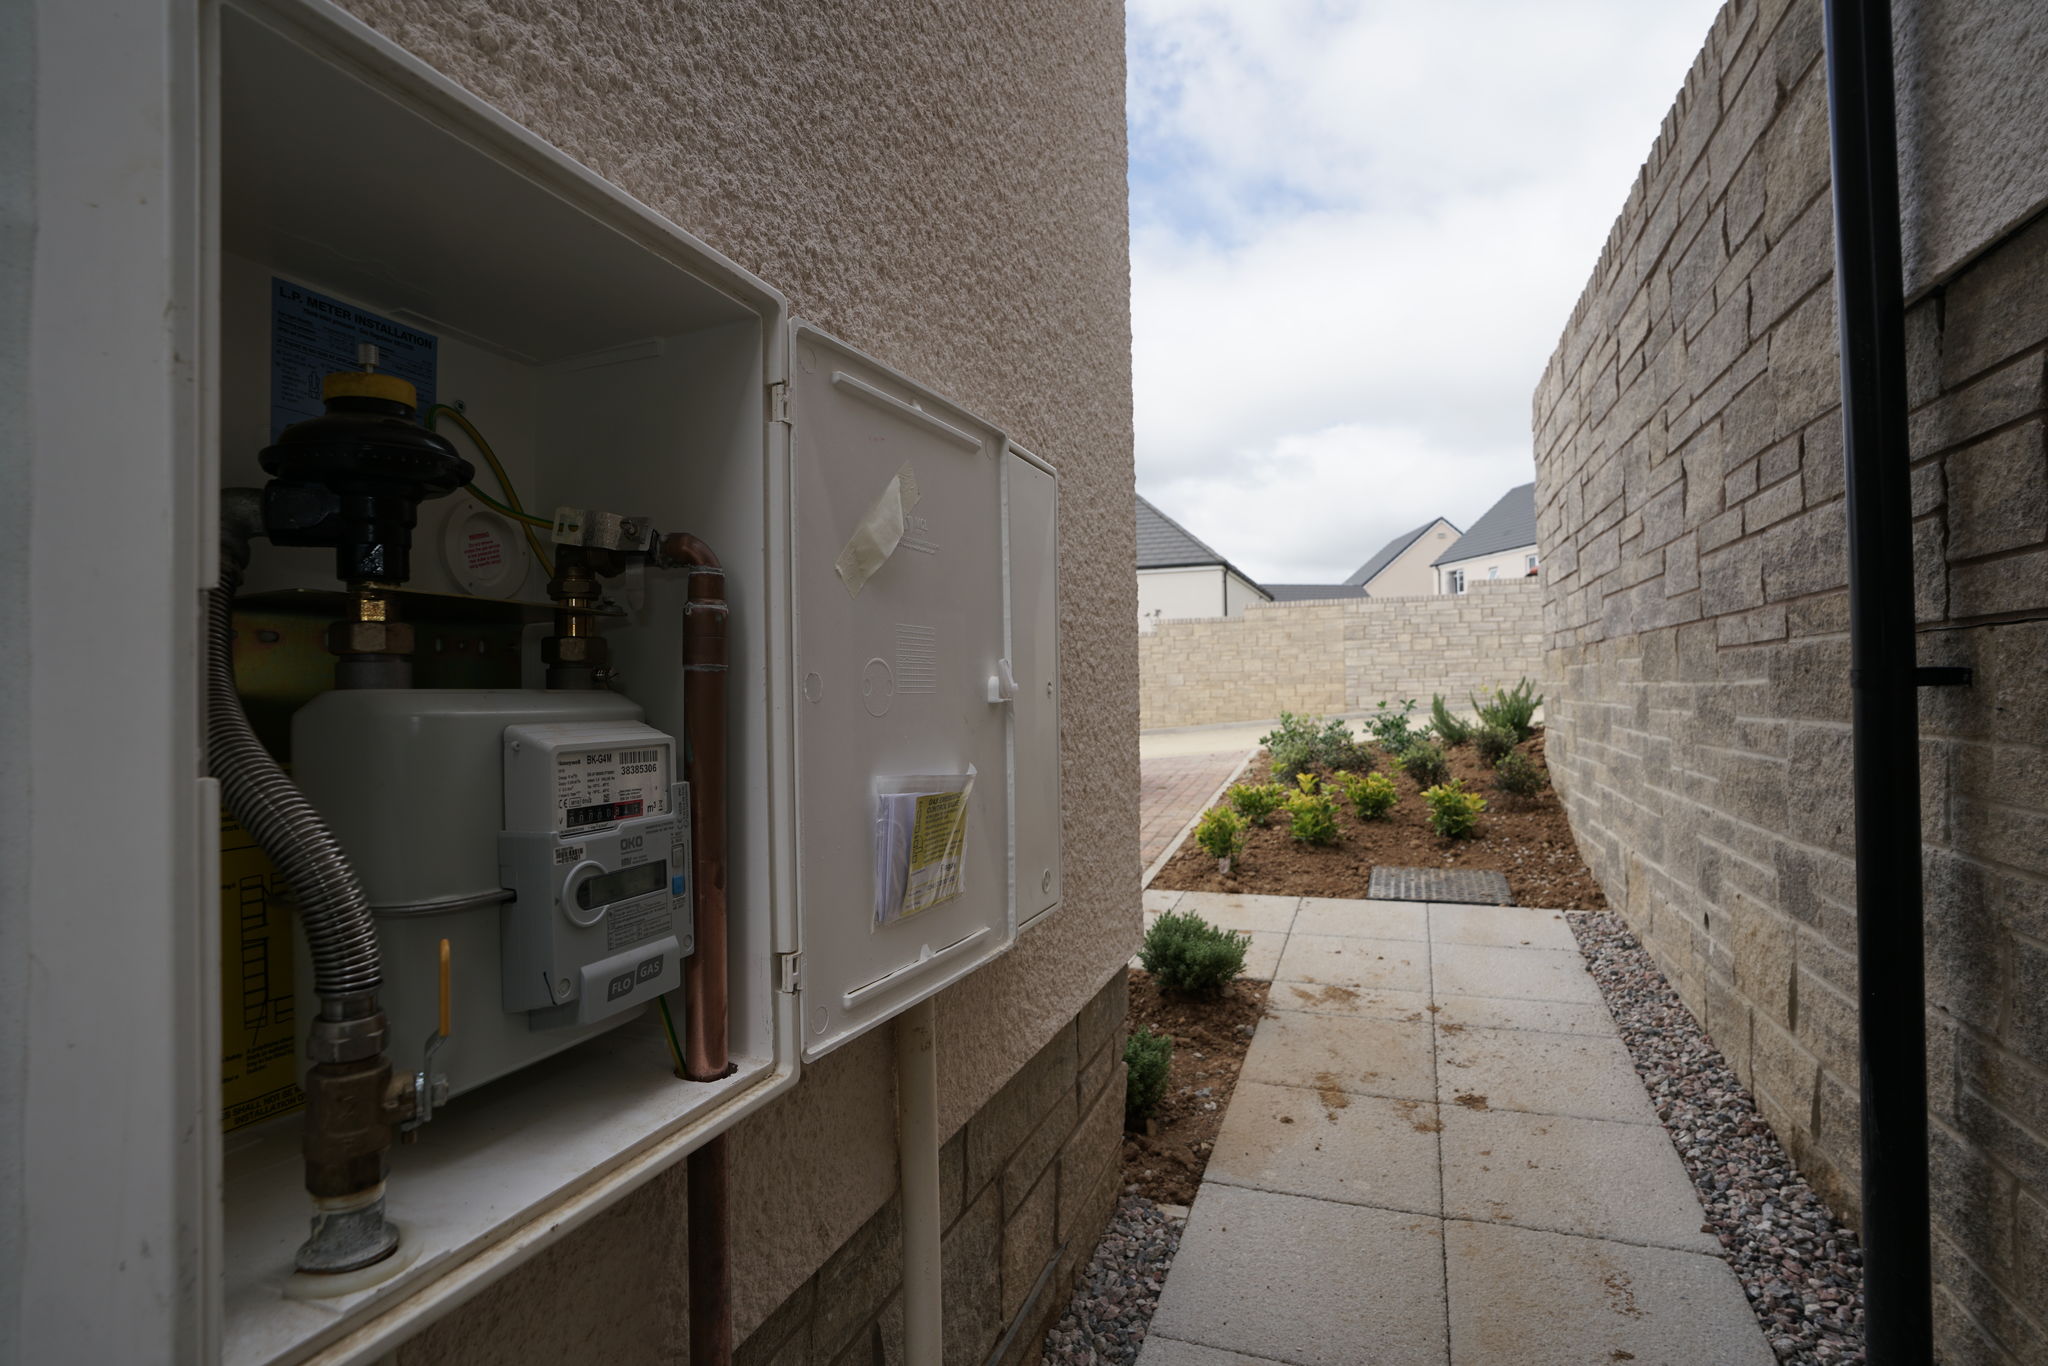 Sustainable developer brings centralised LPG power to over 100 homes image 3